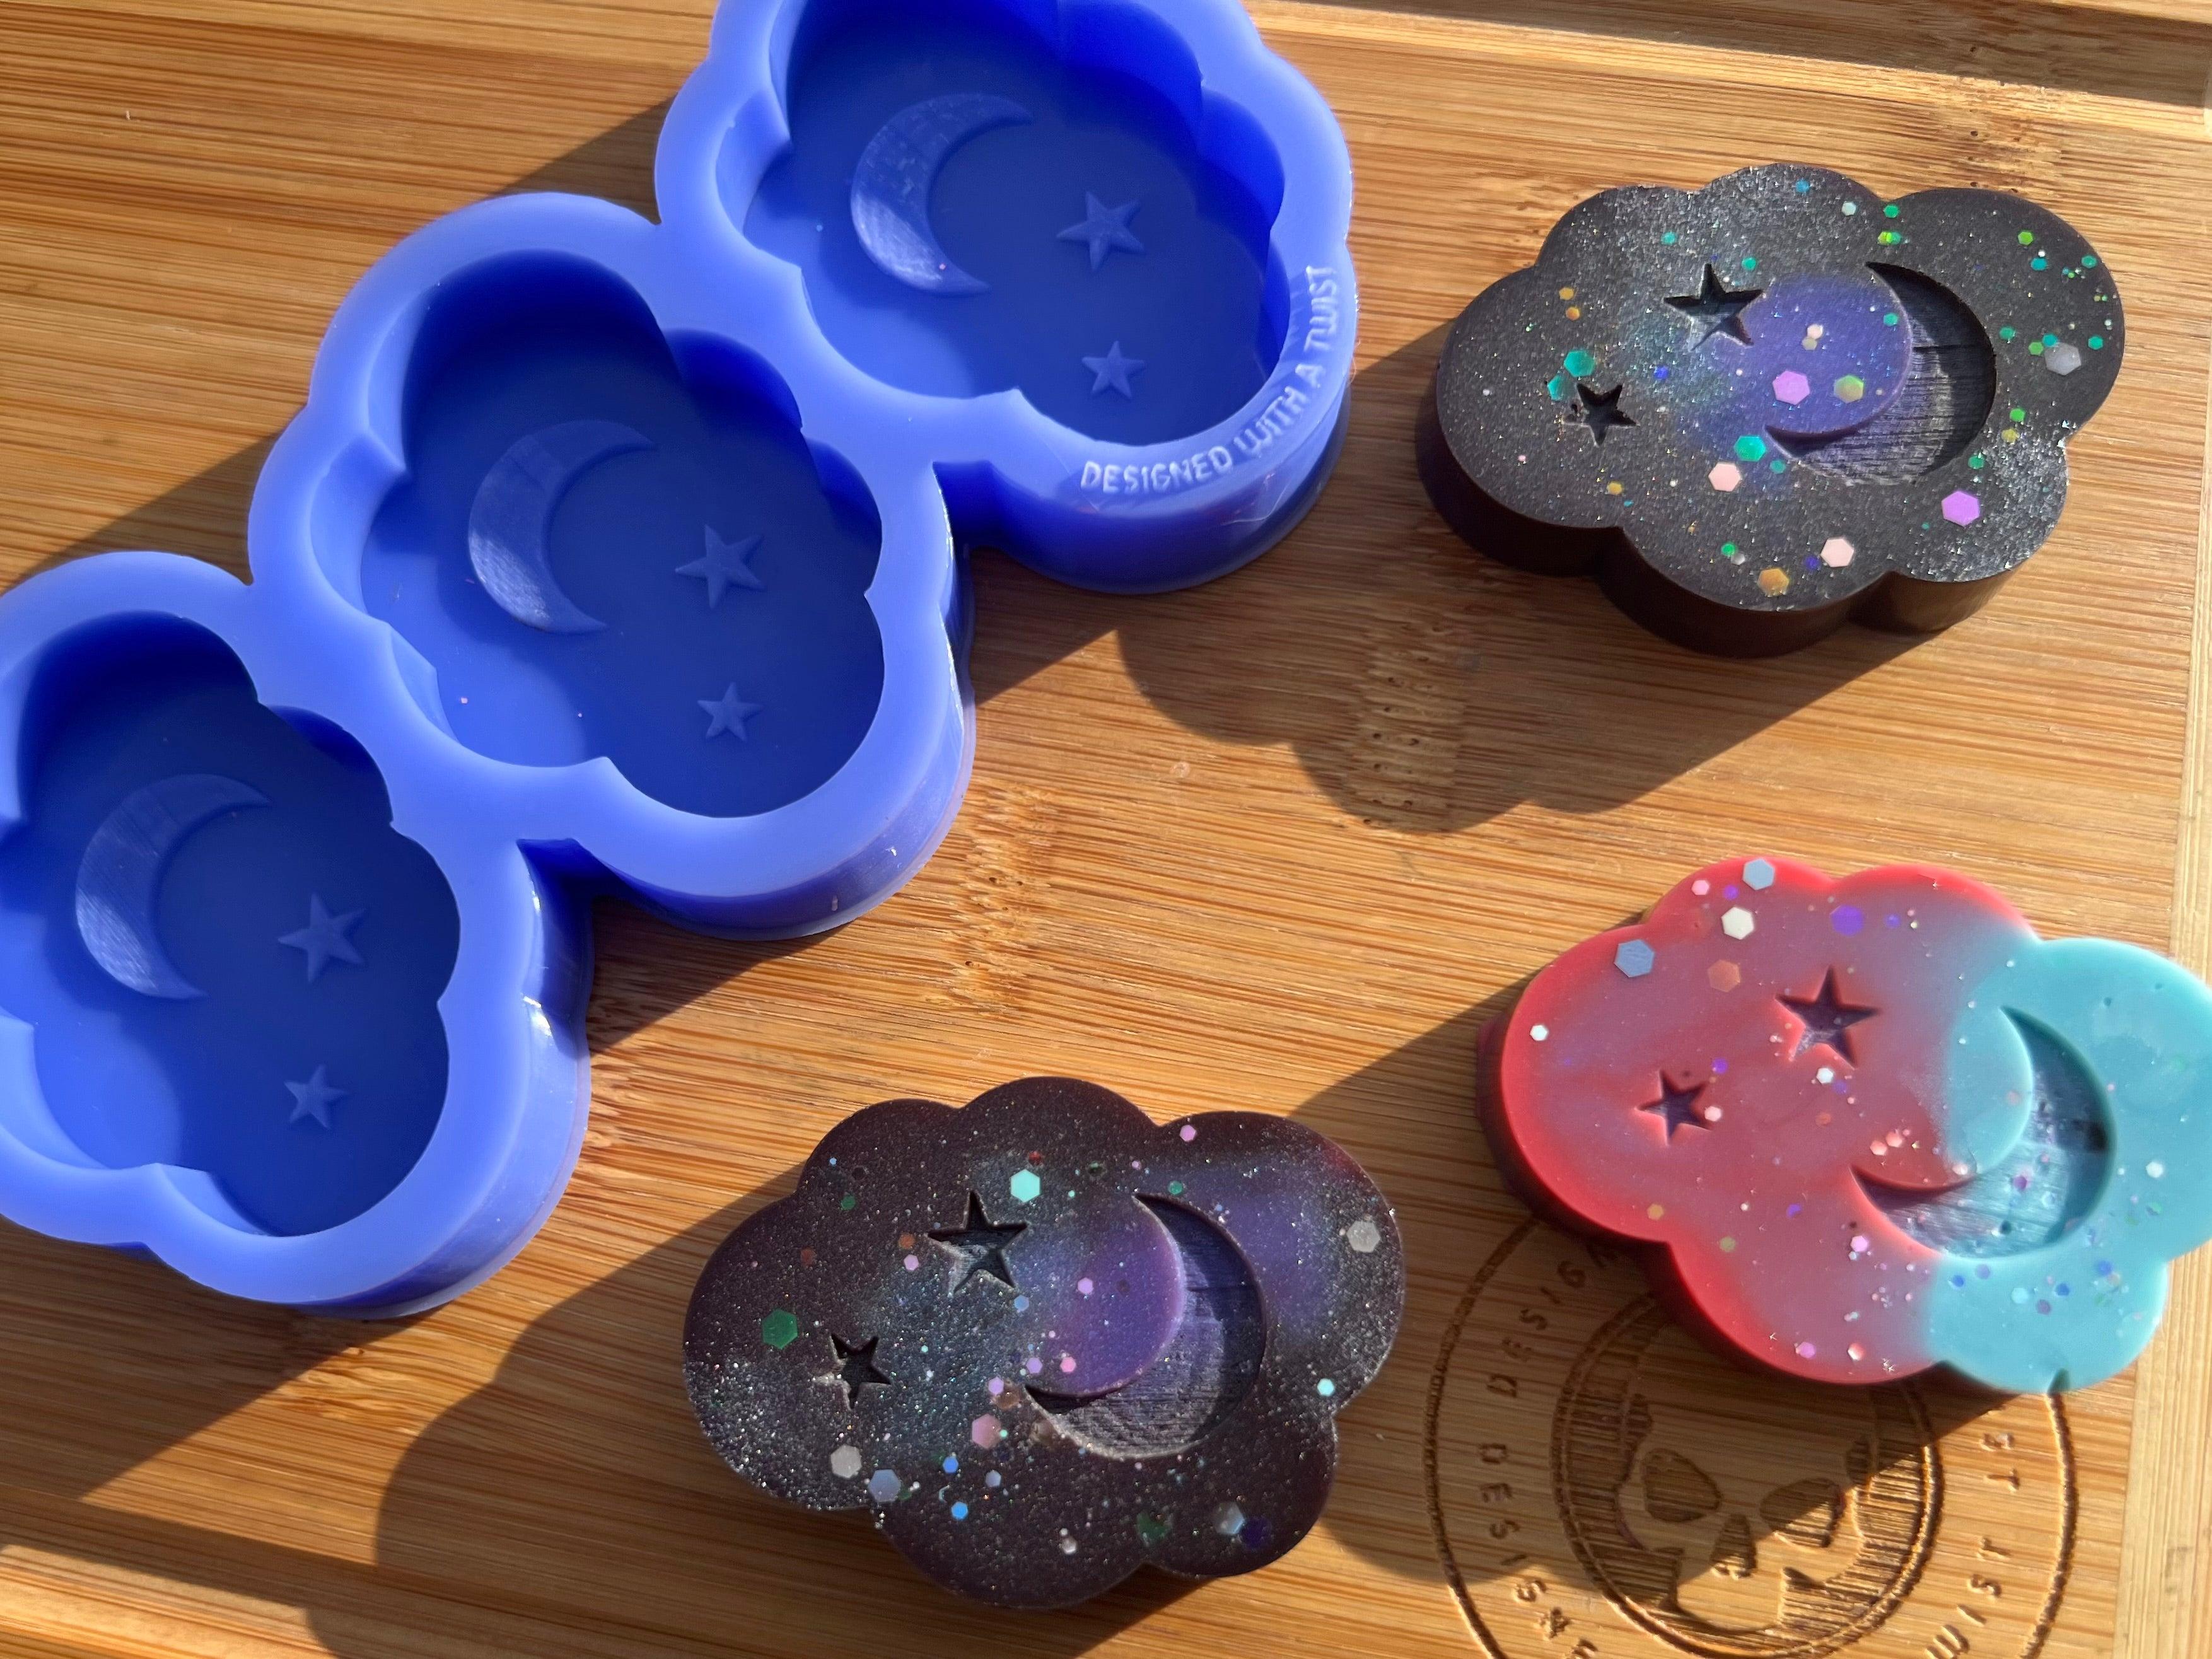 Celestial Clouds Silicone Mold - Designed with a Twist - Top quality silicone molds made in the UK.